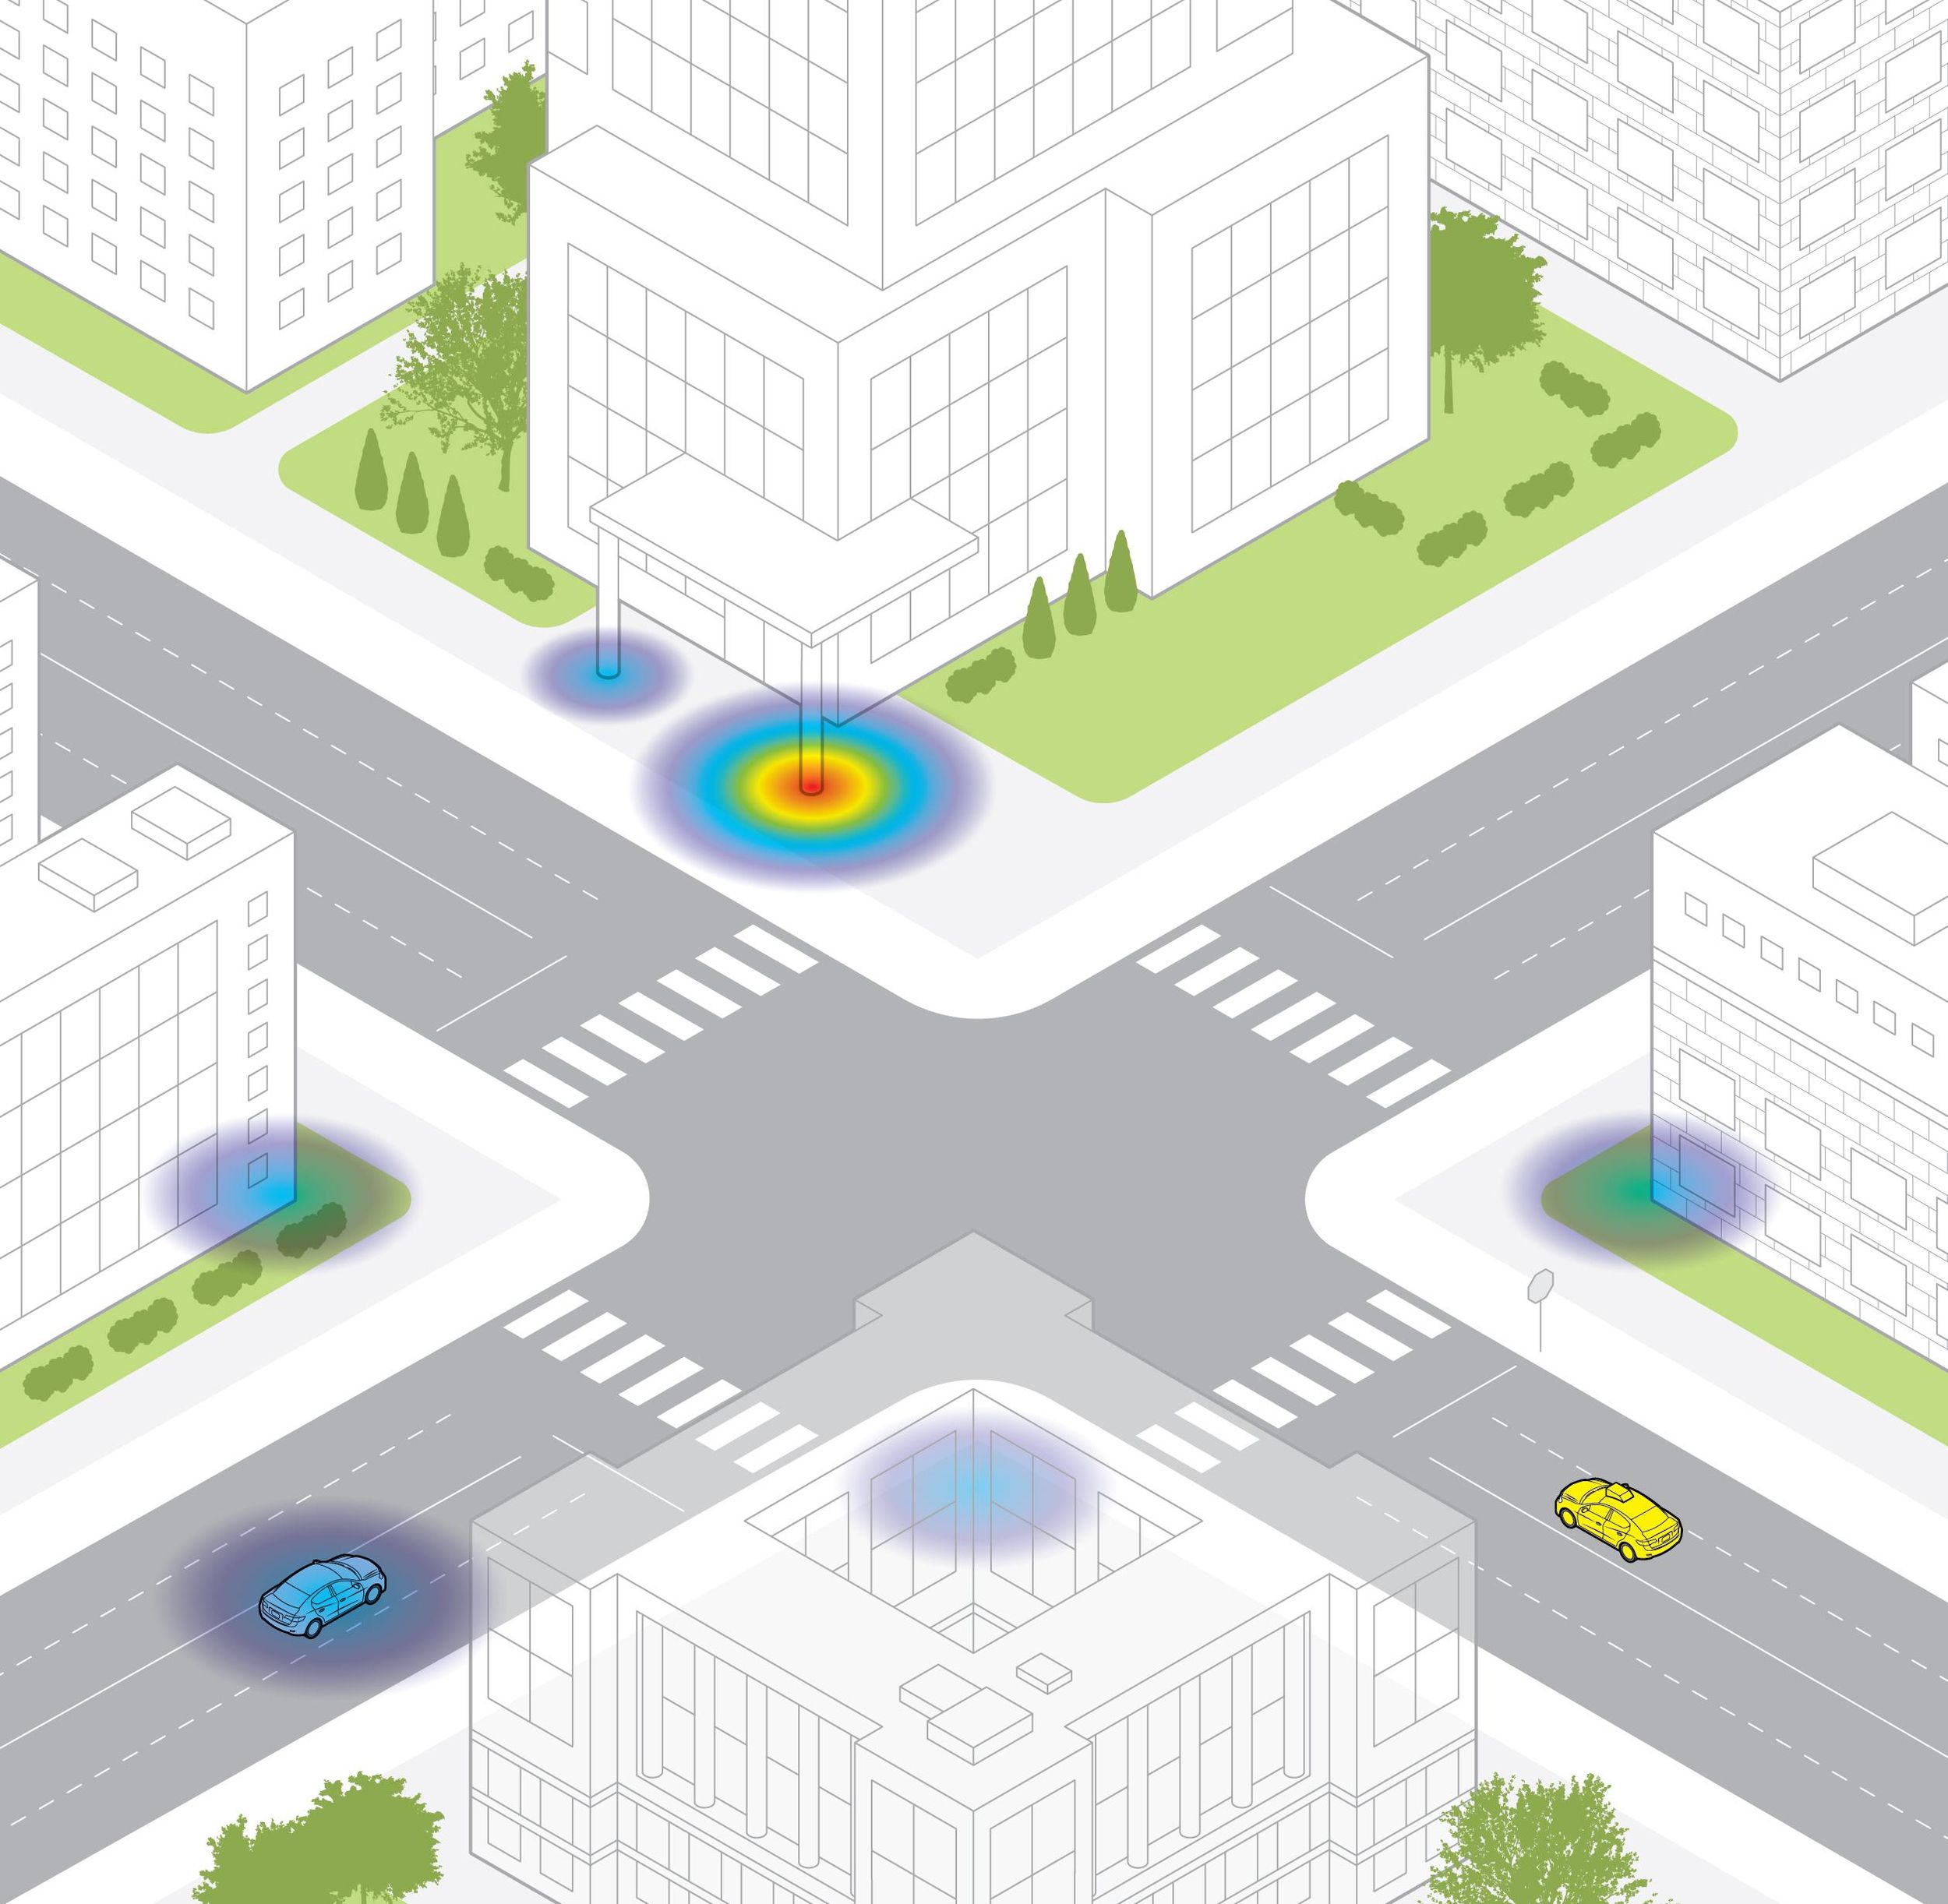 Illustration of the modeling of a autonomous vehicle within a urban city intersection.